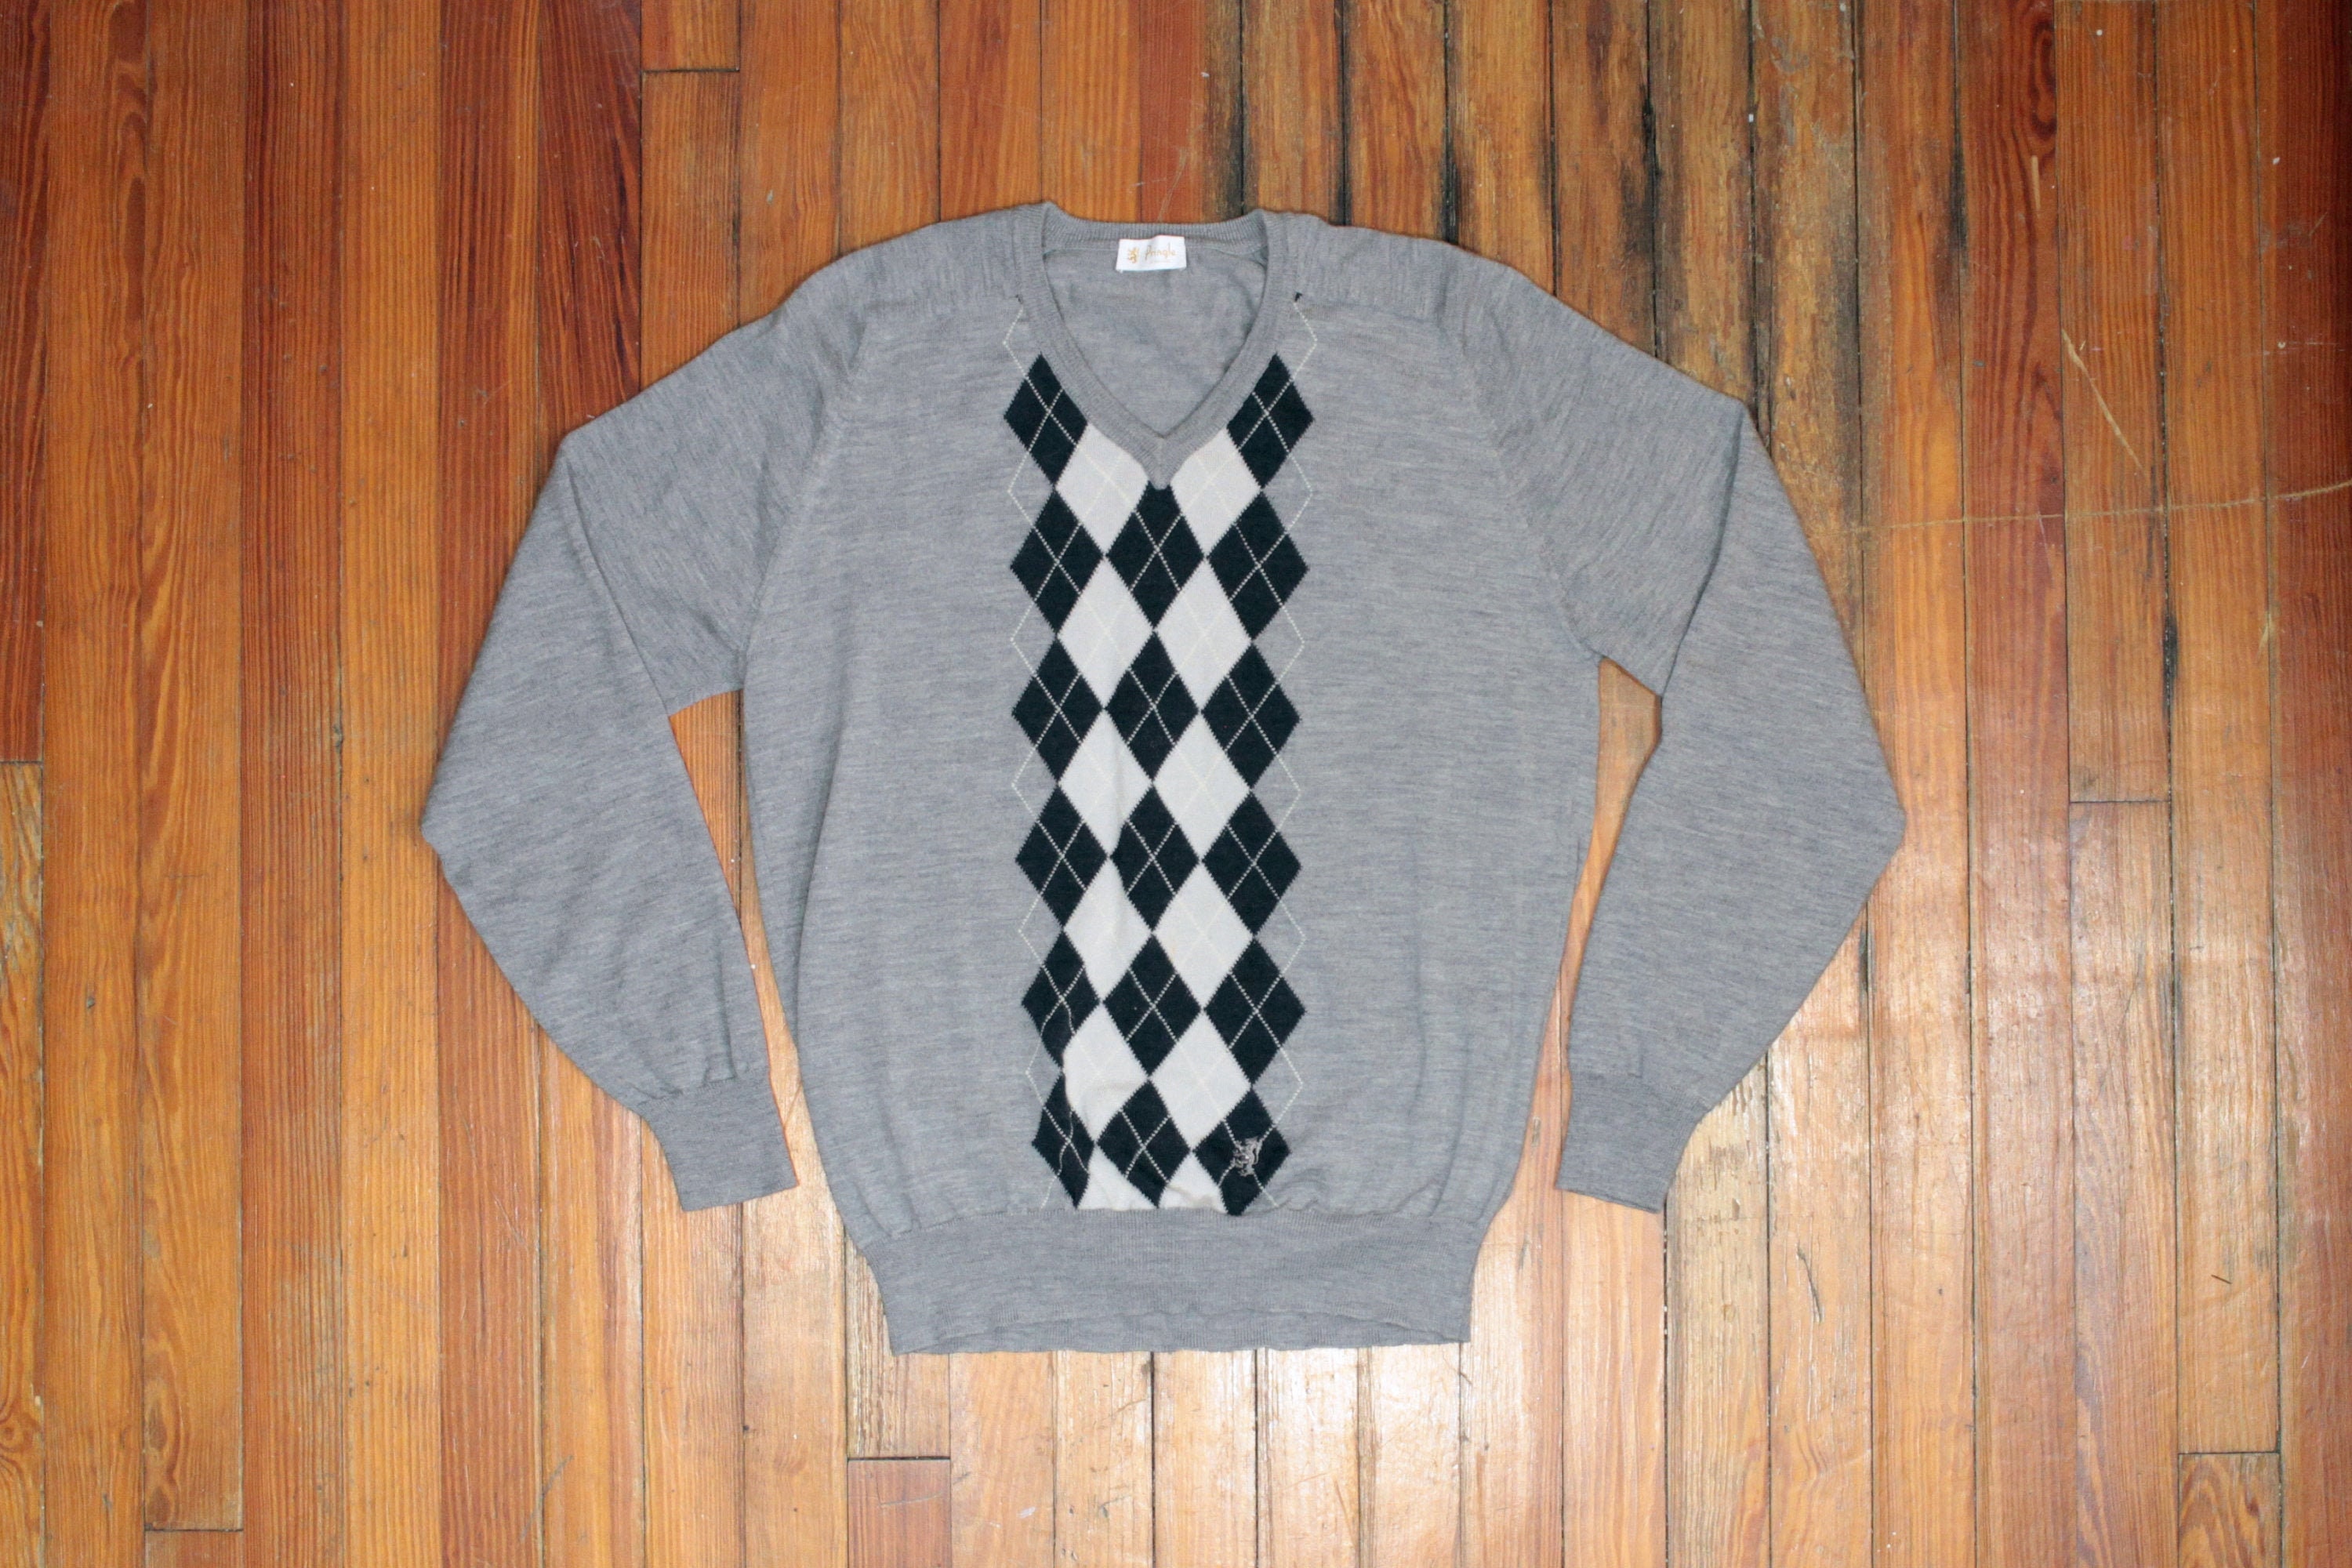 Vintage Pringle Argyle Sweater Grey Charcoal White Pullover - Etsy Finland